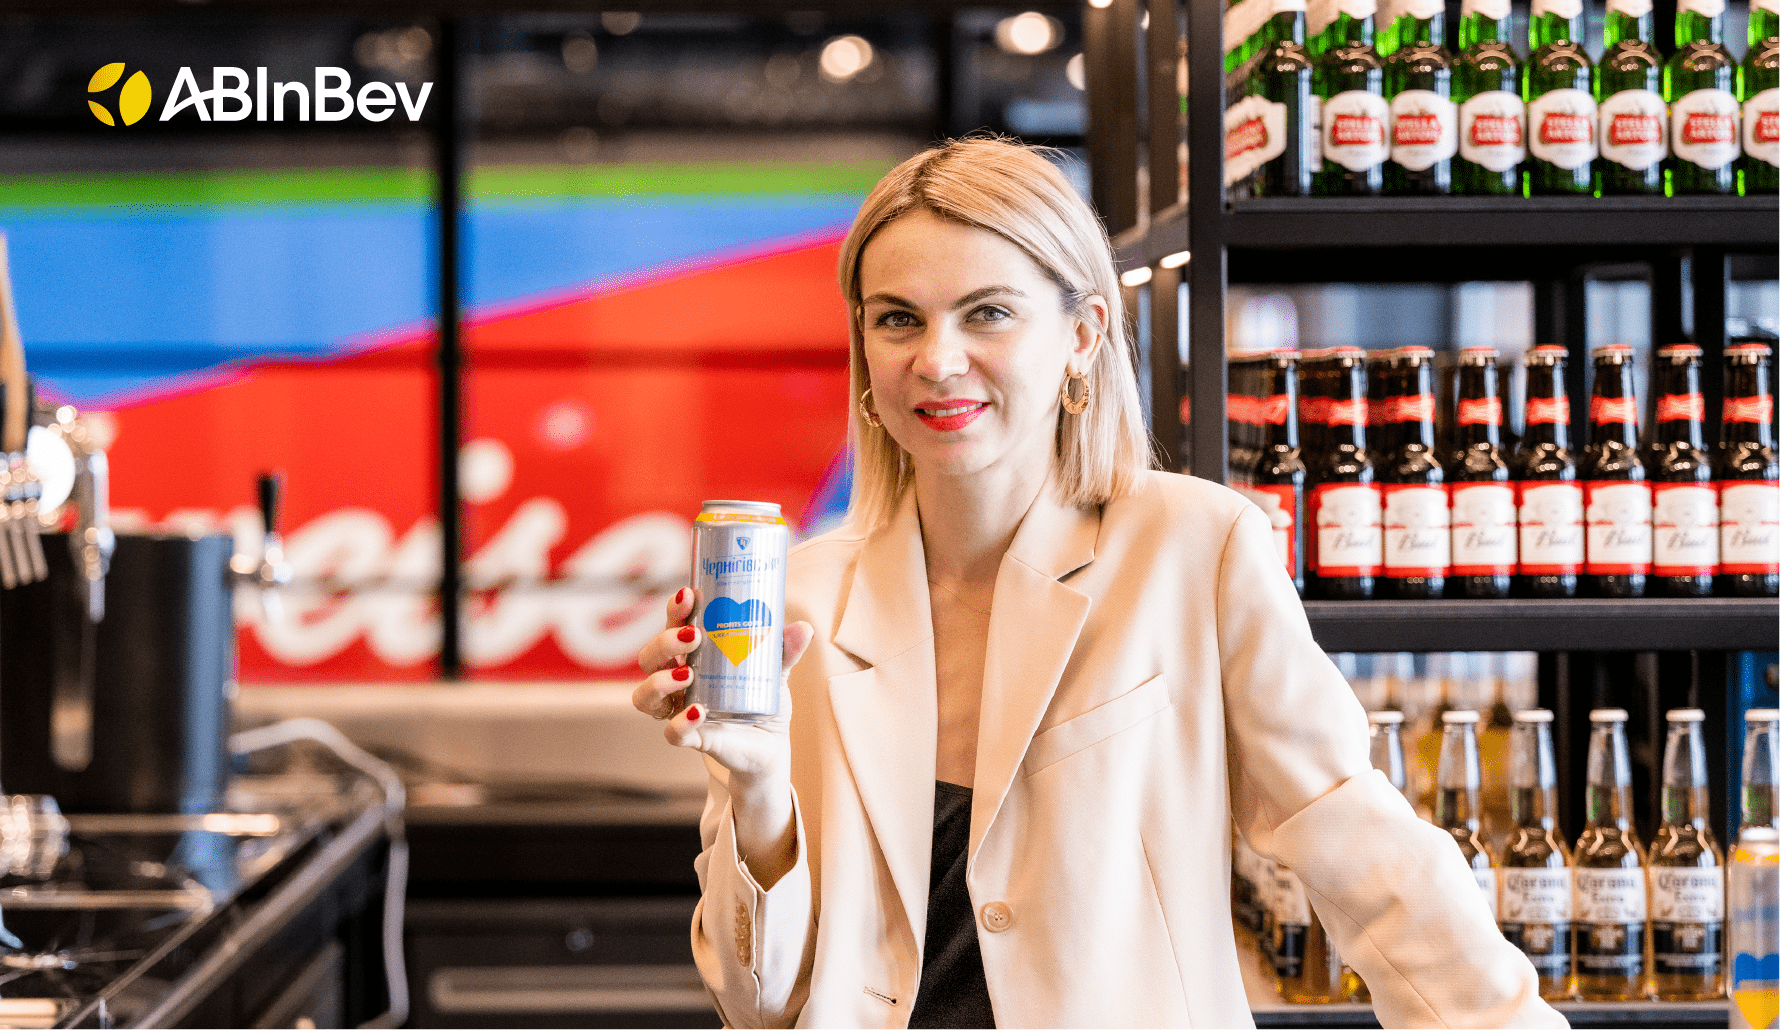 After leaving Ukraine, Anna Rudenko is helping AB InBev’s humanitarian relief efforts by sharing Chernigivske, her country’s most-loved beer brand, with the world